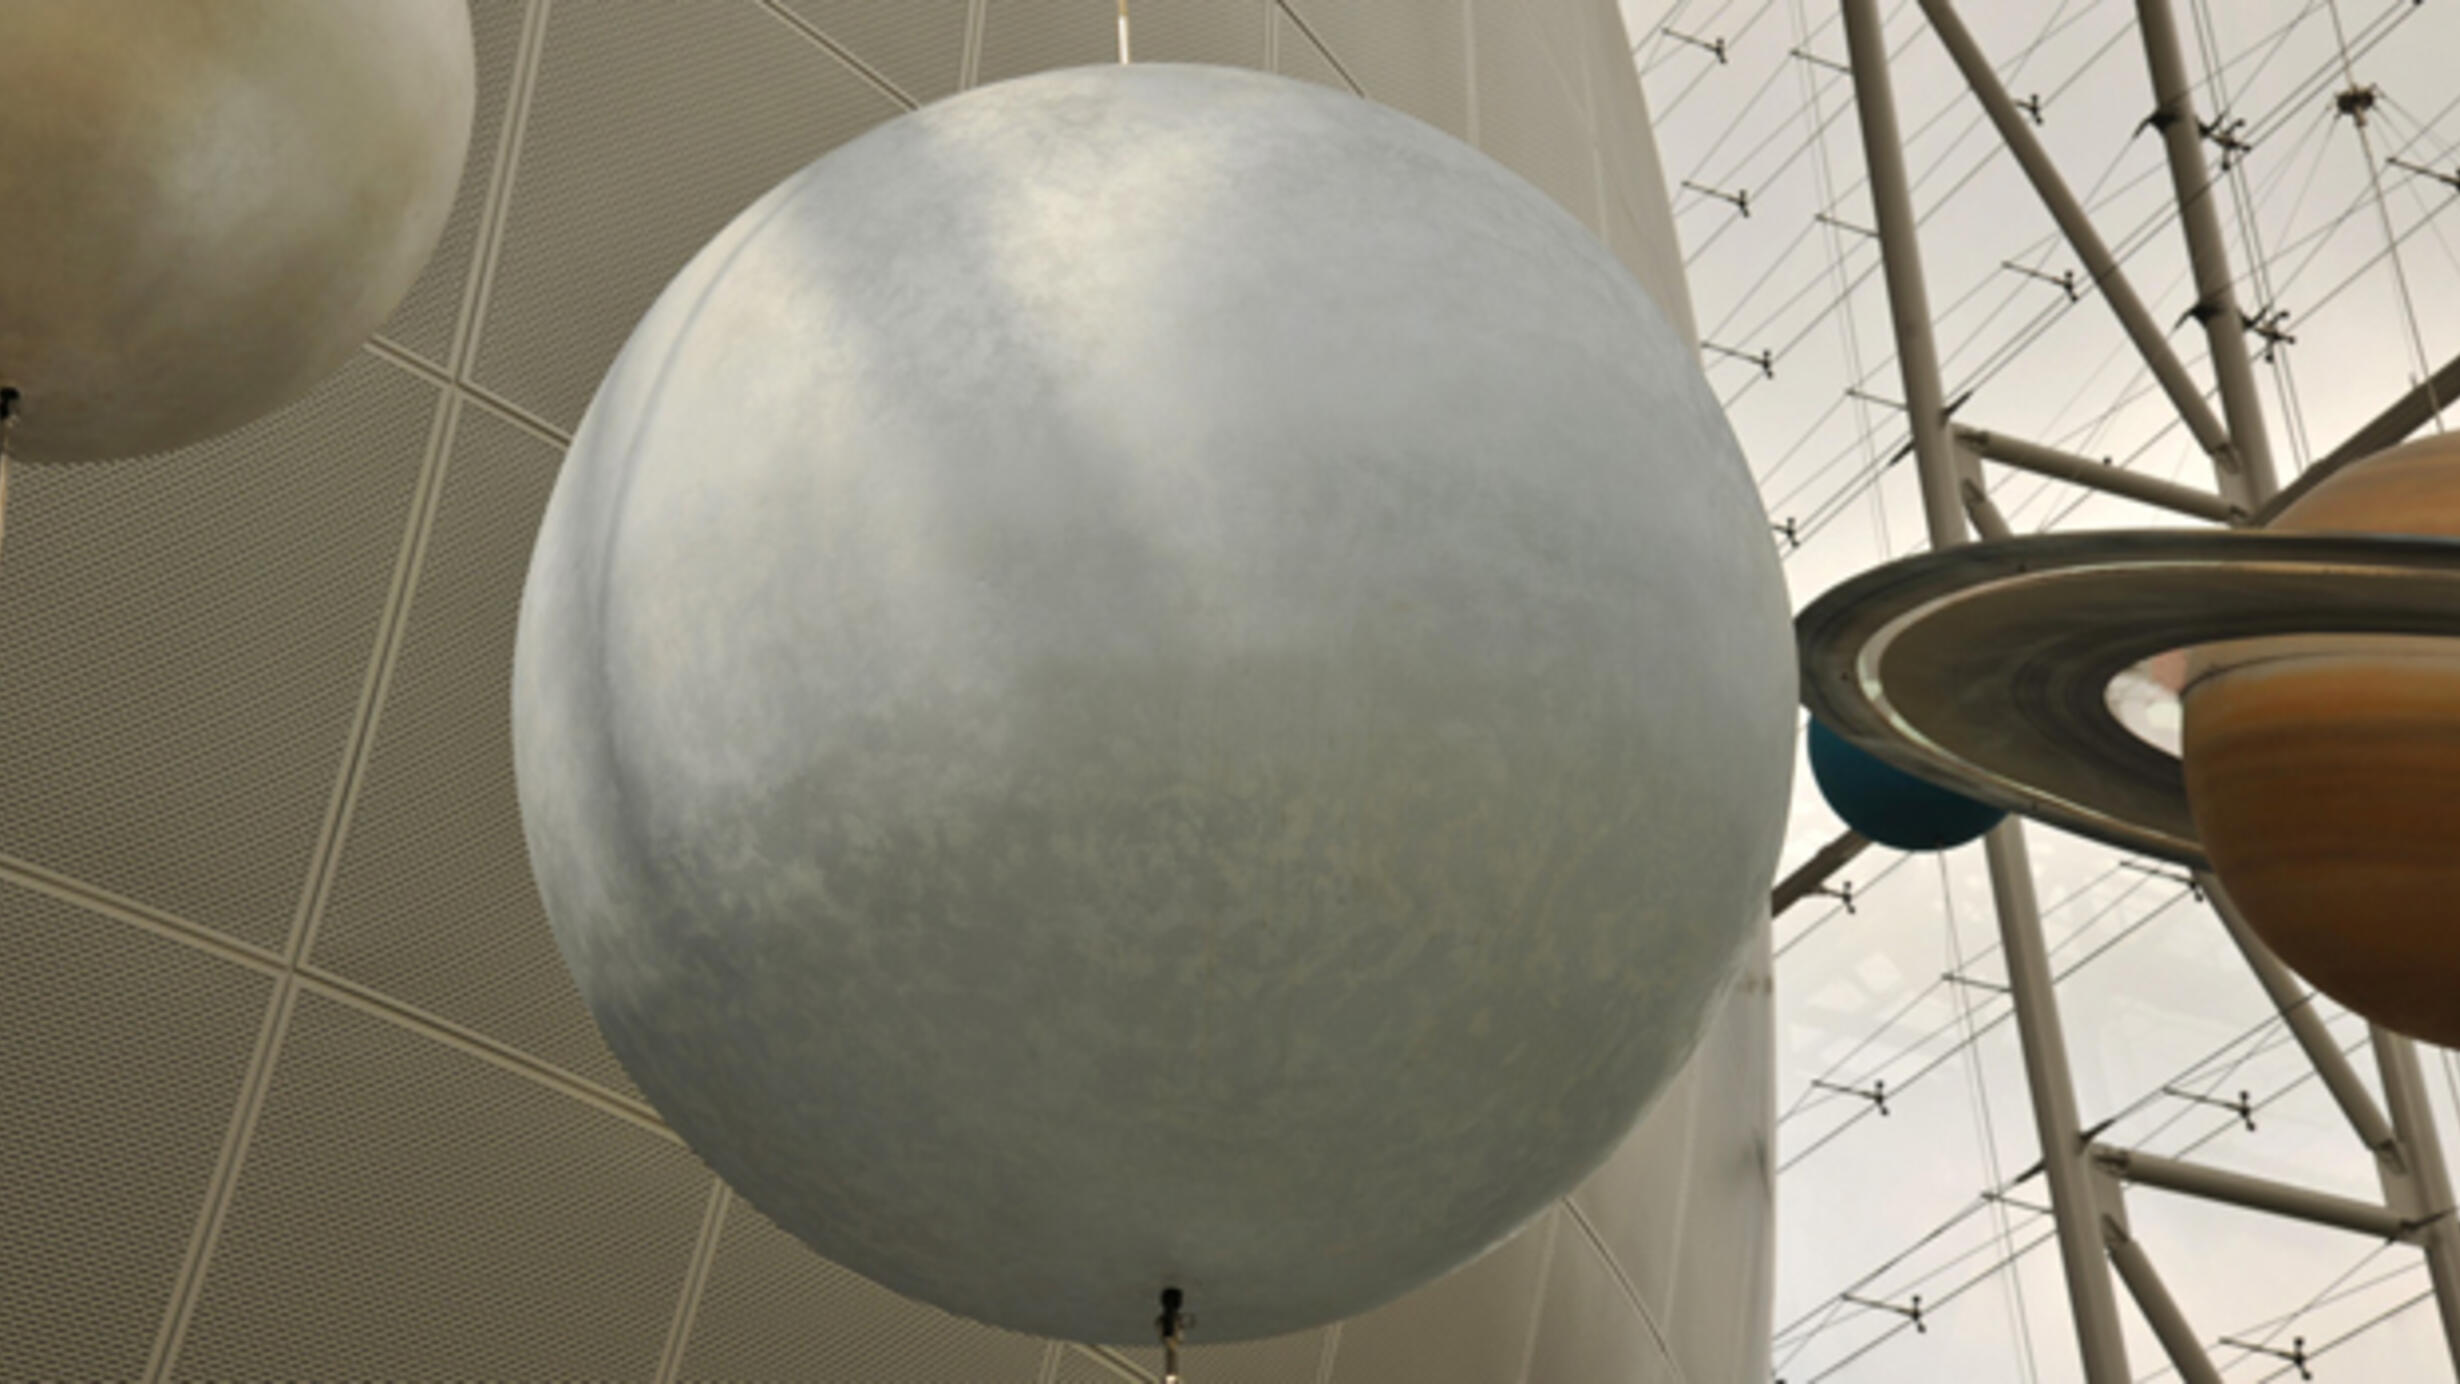 In the Rose Center for Earth and Space, a model of the star Vega, represented as smooth white sphere.